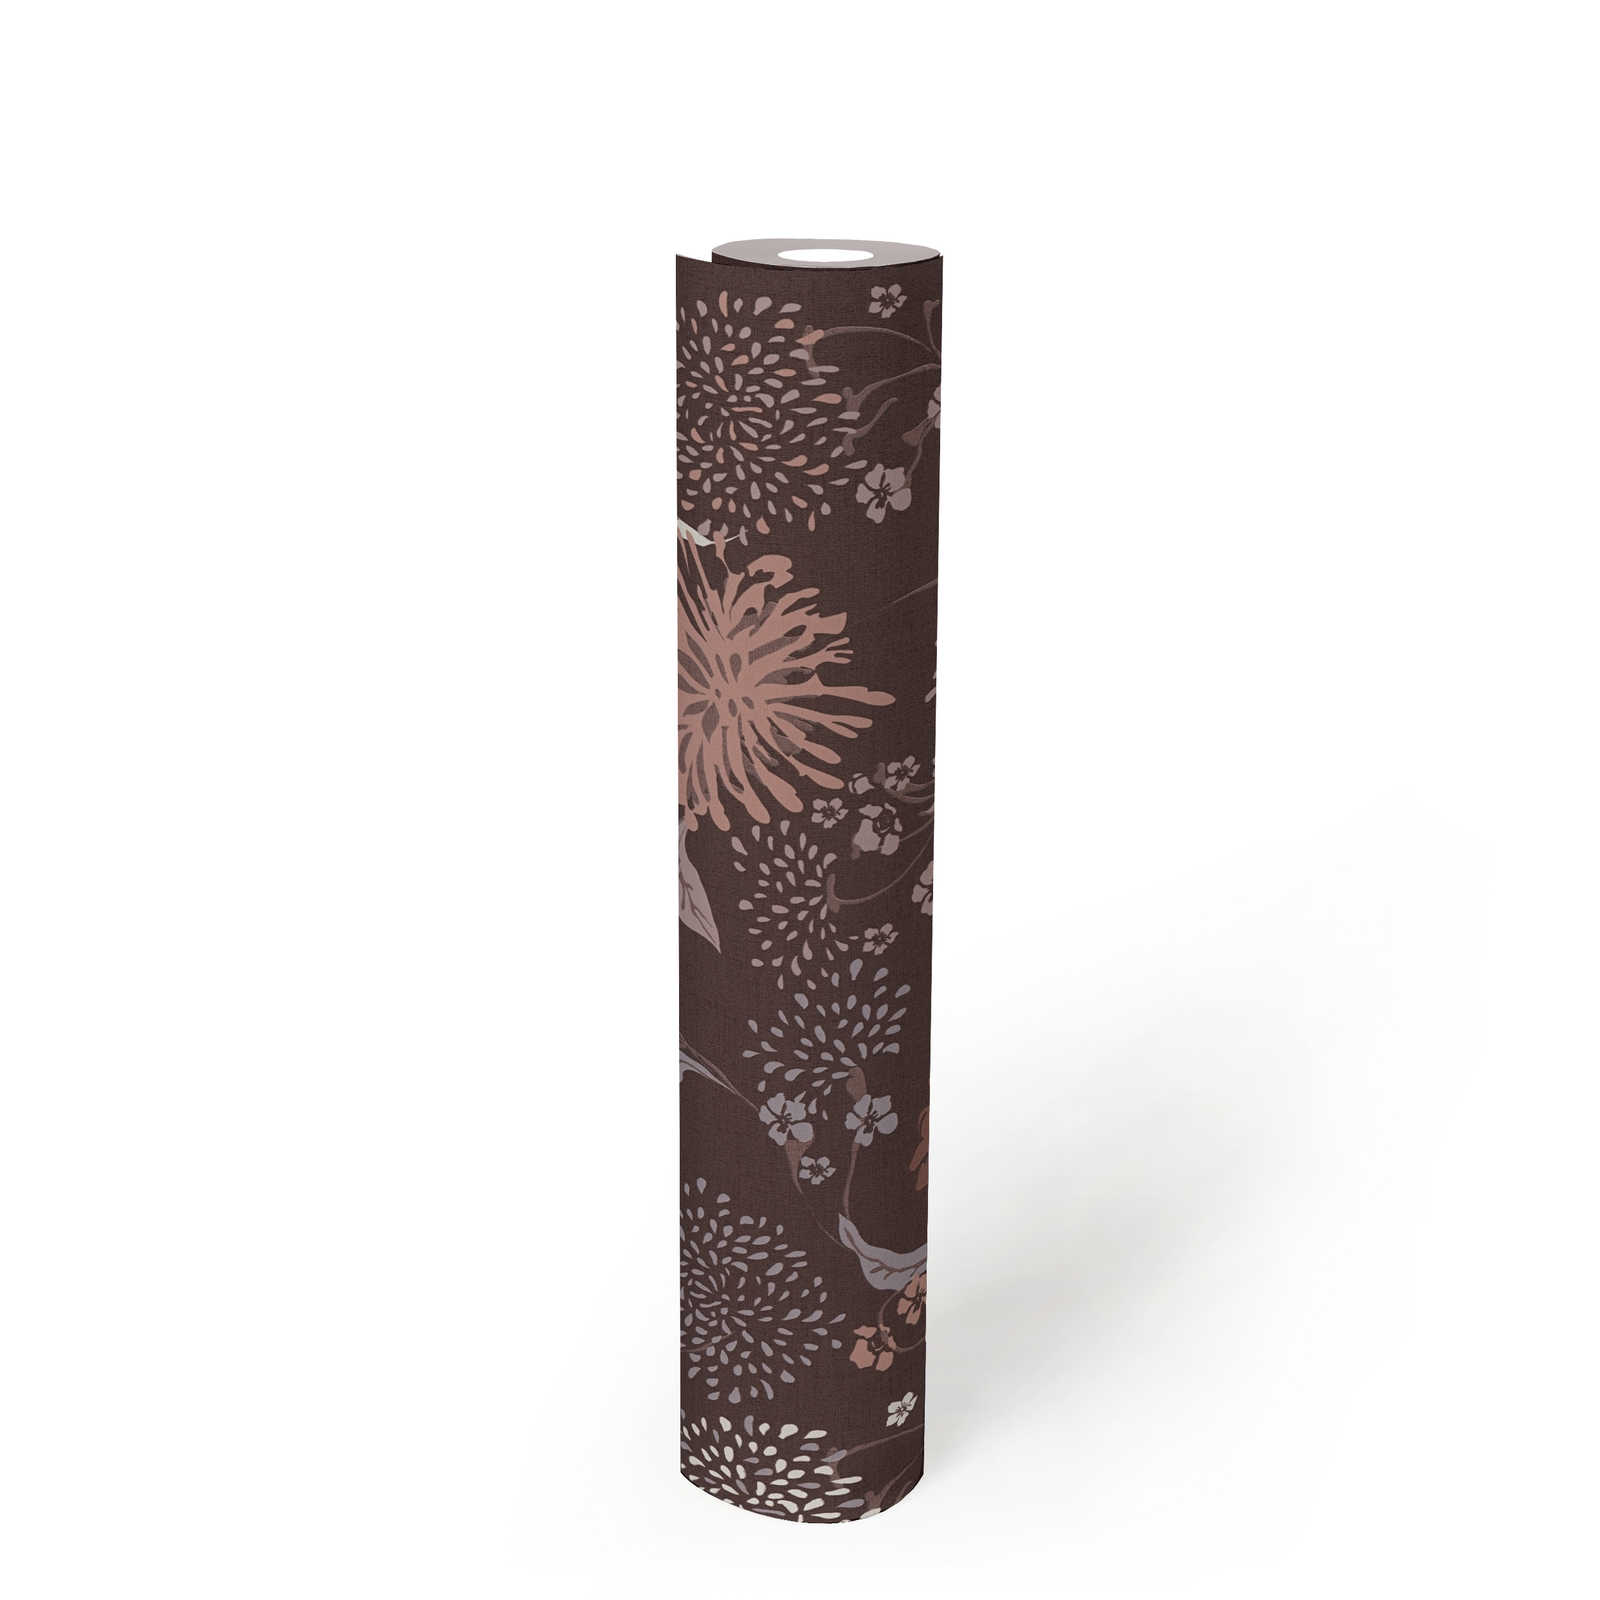             Floral wallpaper with playful pattern & linen look - wine red, grey, white
        